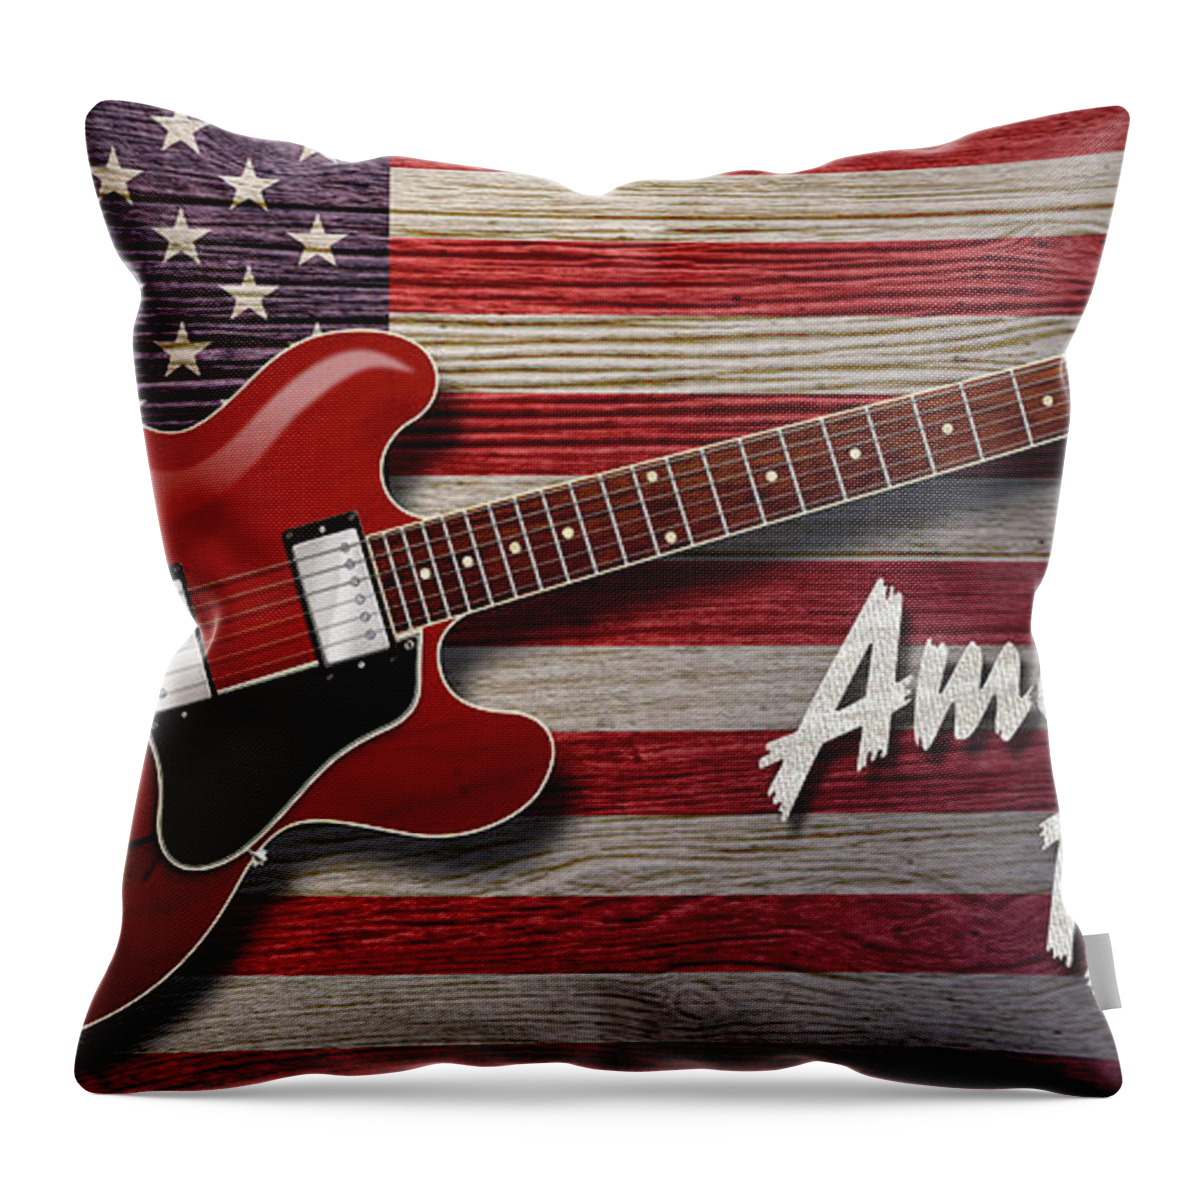 Es-335 Throw Pillow featuring the digital art American Blues 335 by WB Johnston